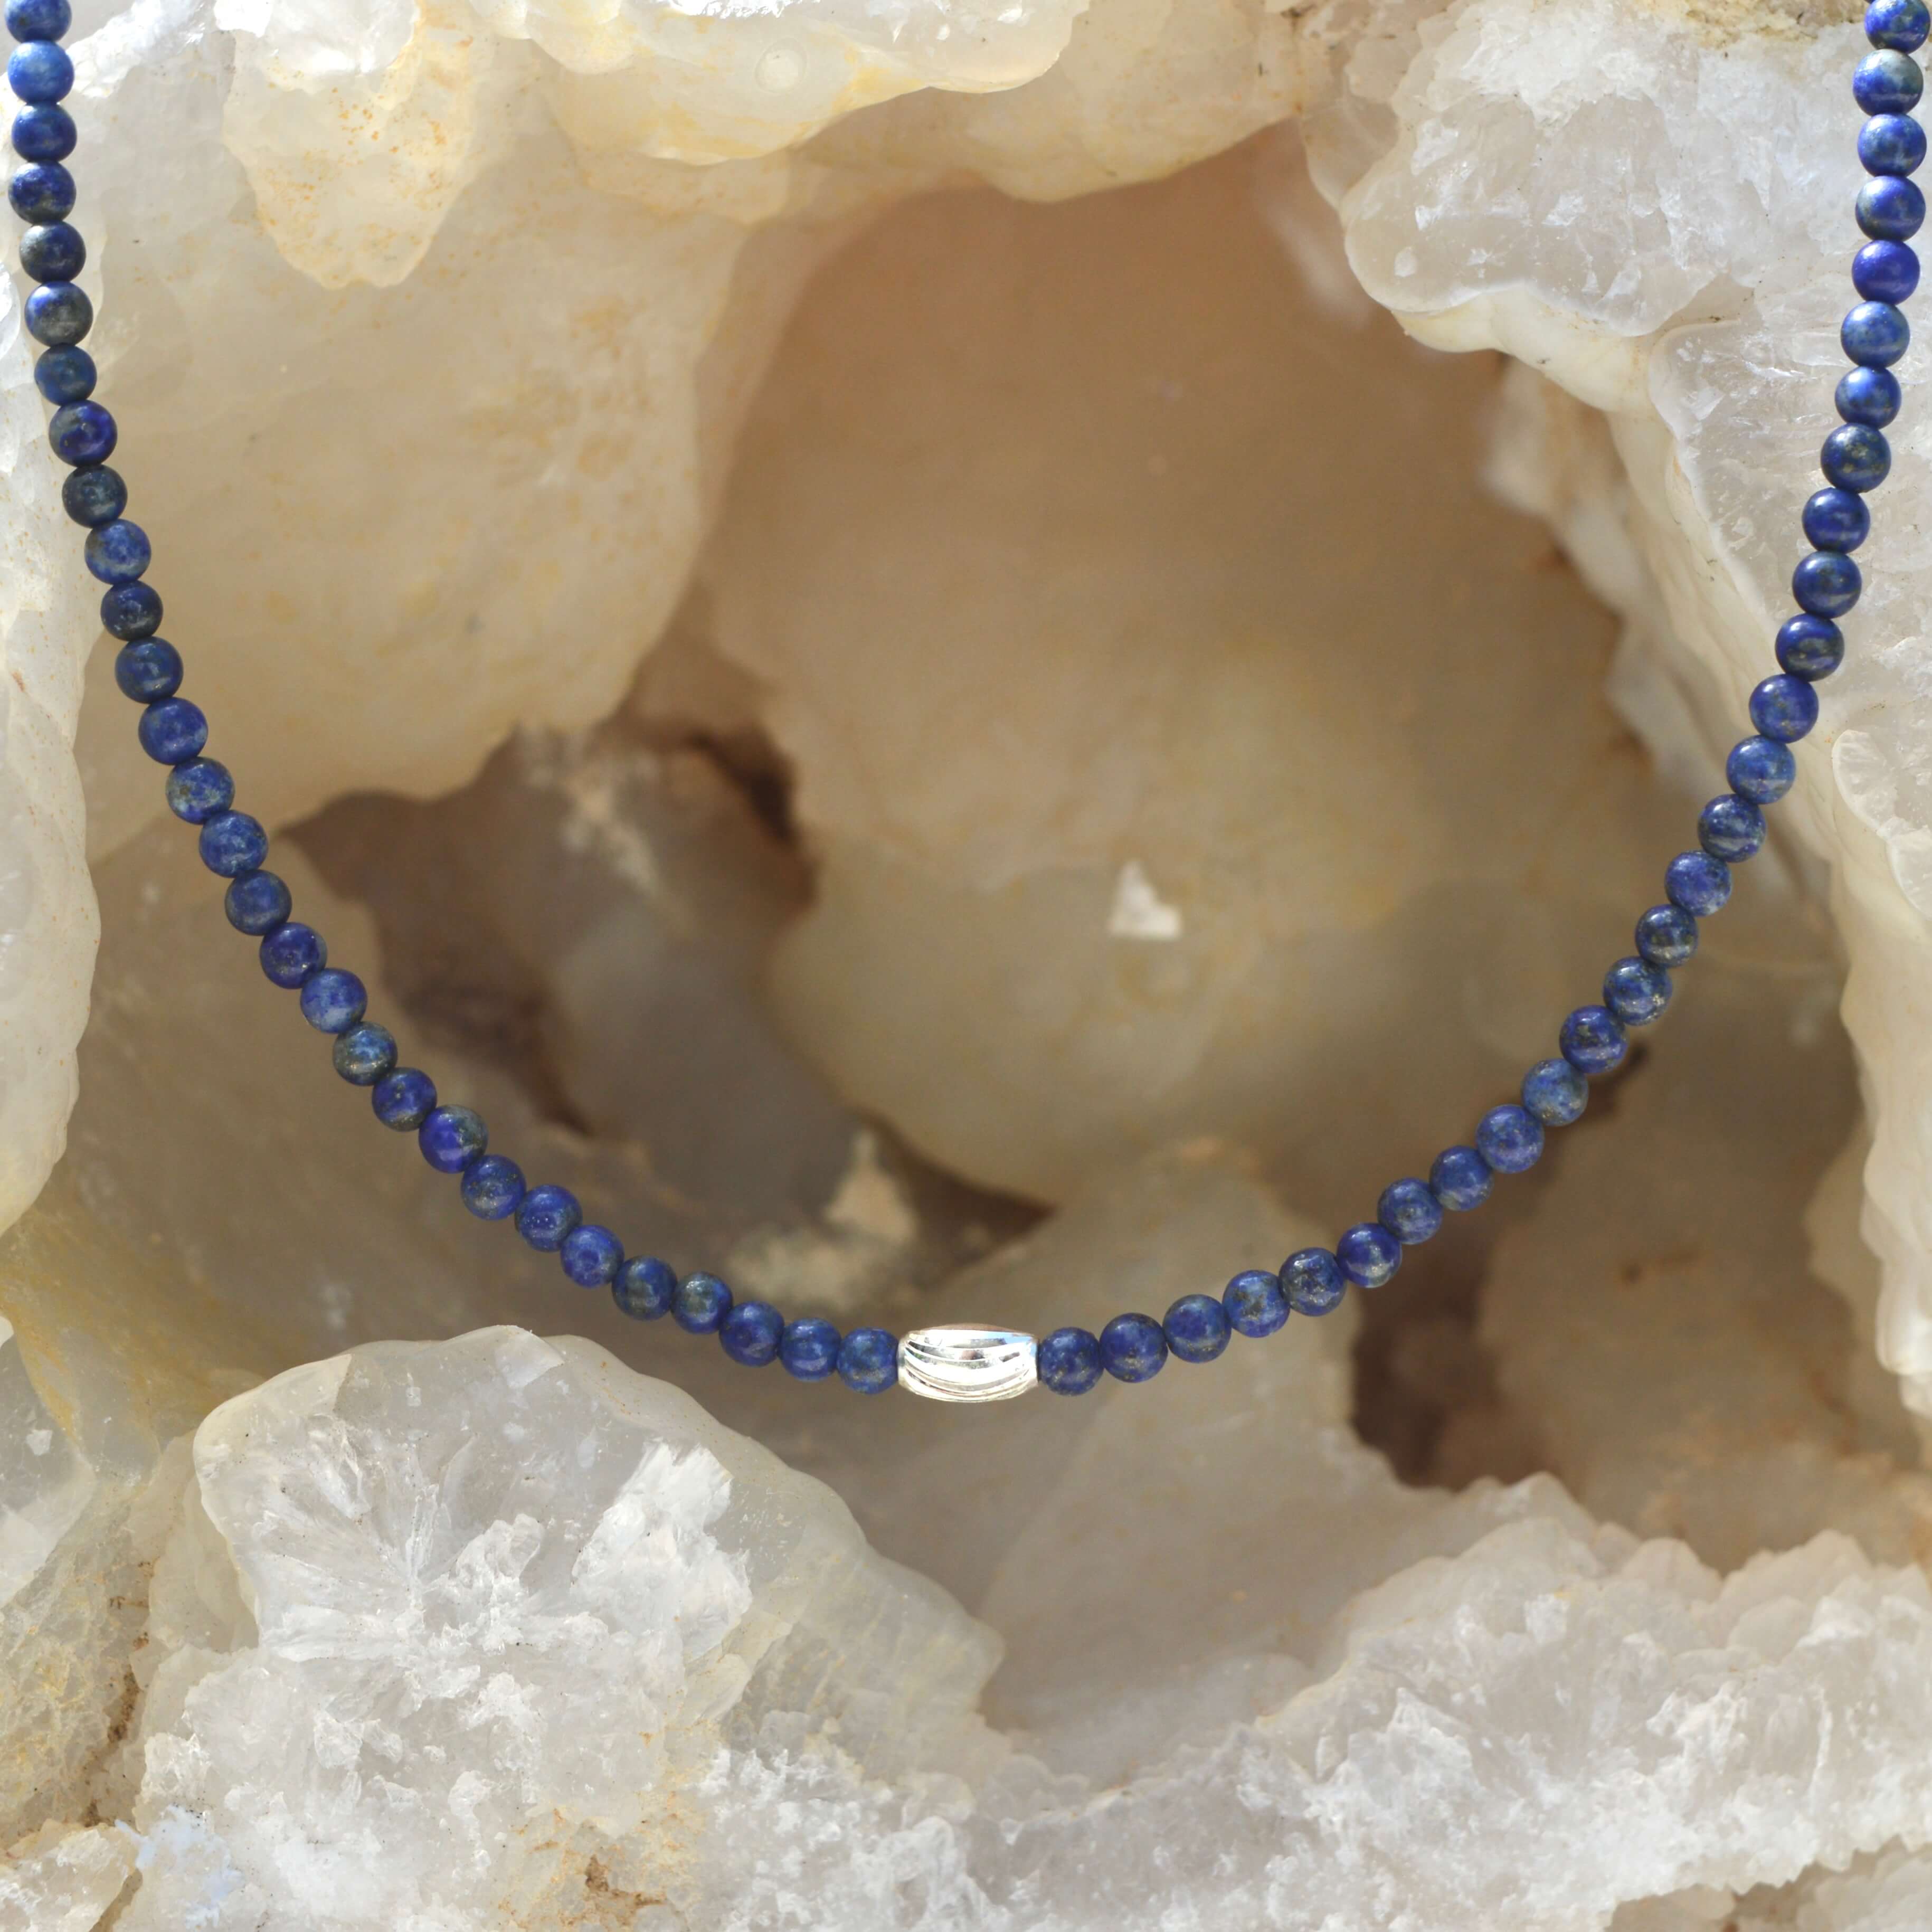 THE DAINTY-Silver- Lapis Lazuli- NECKLACE - Headless Nation